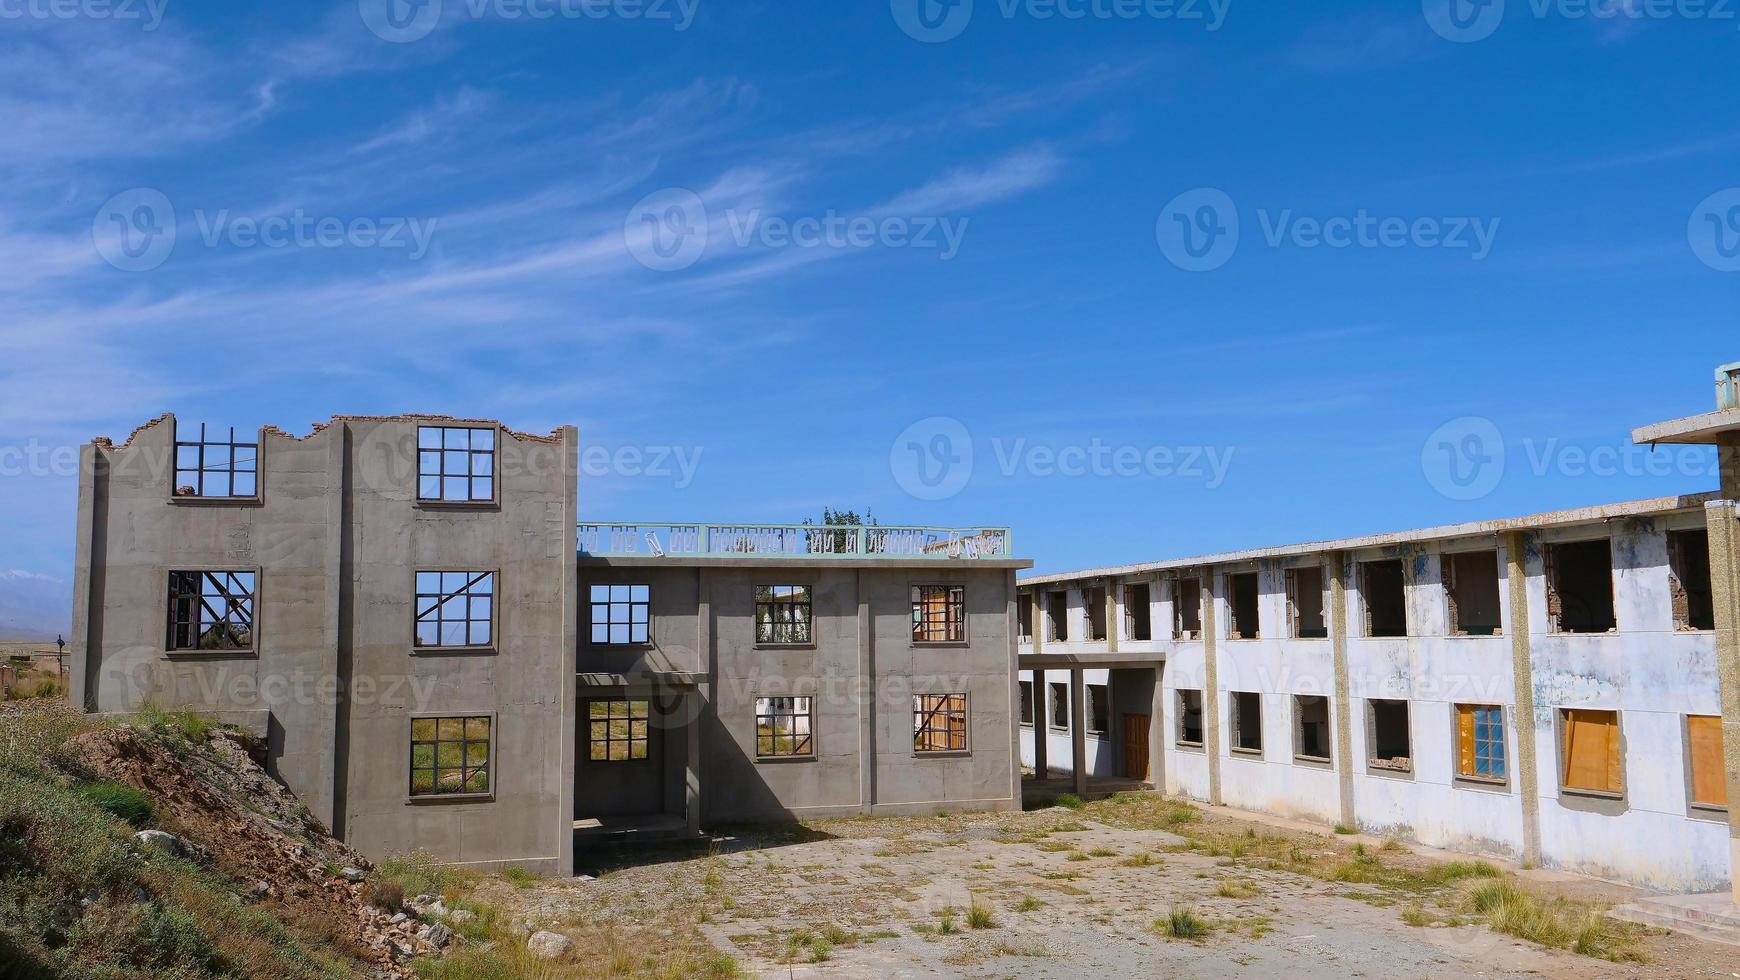 Landscape view of desert small town, a filming location in Gansu China photo